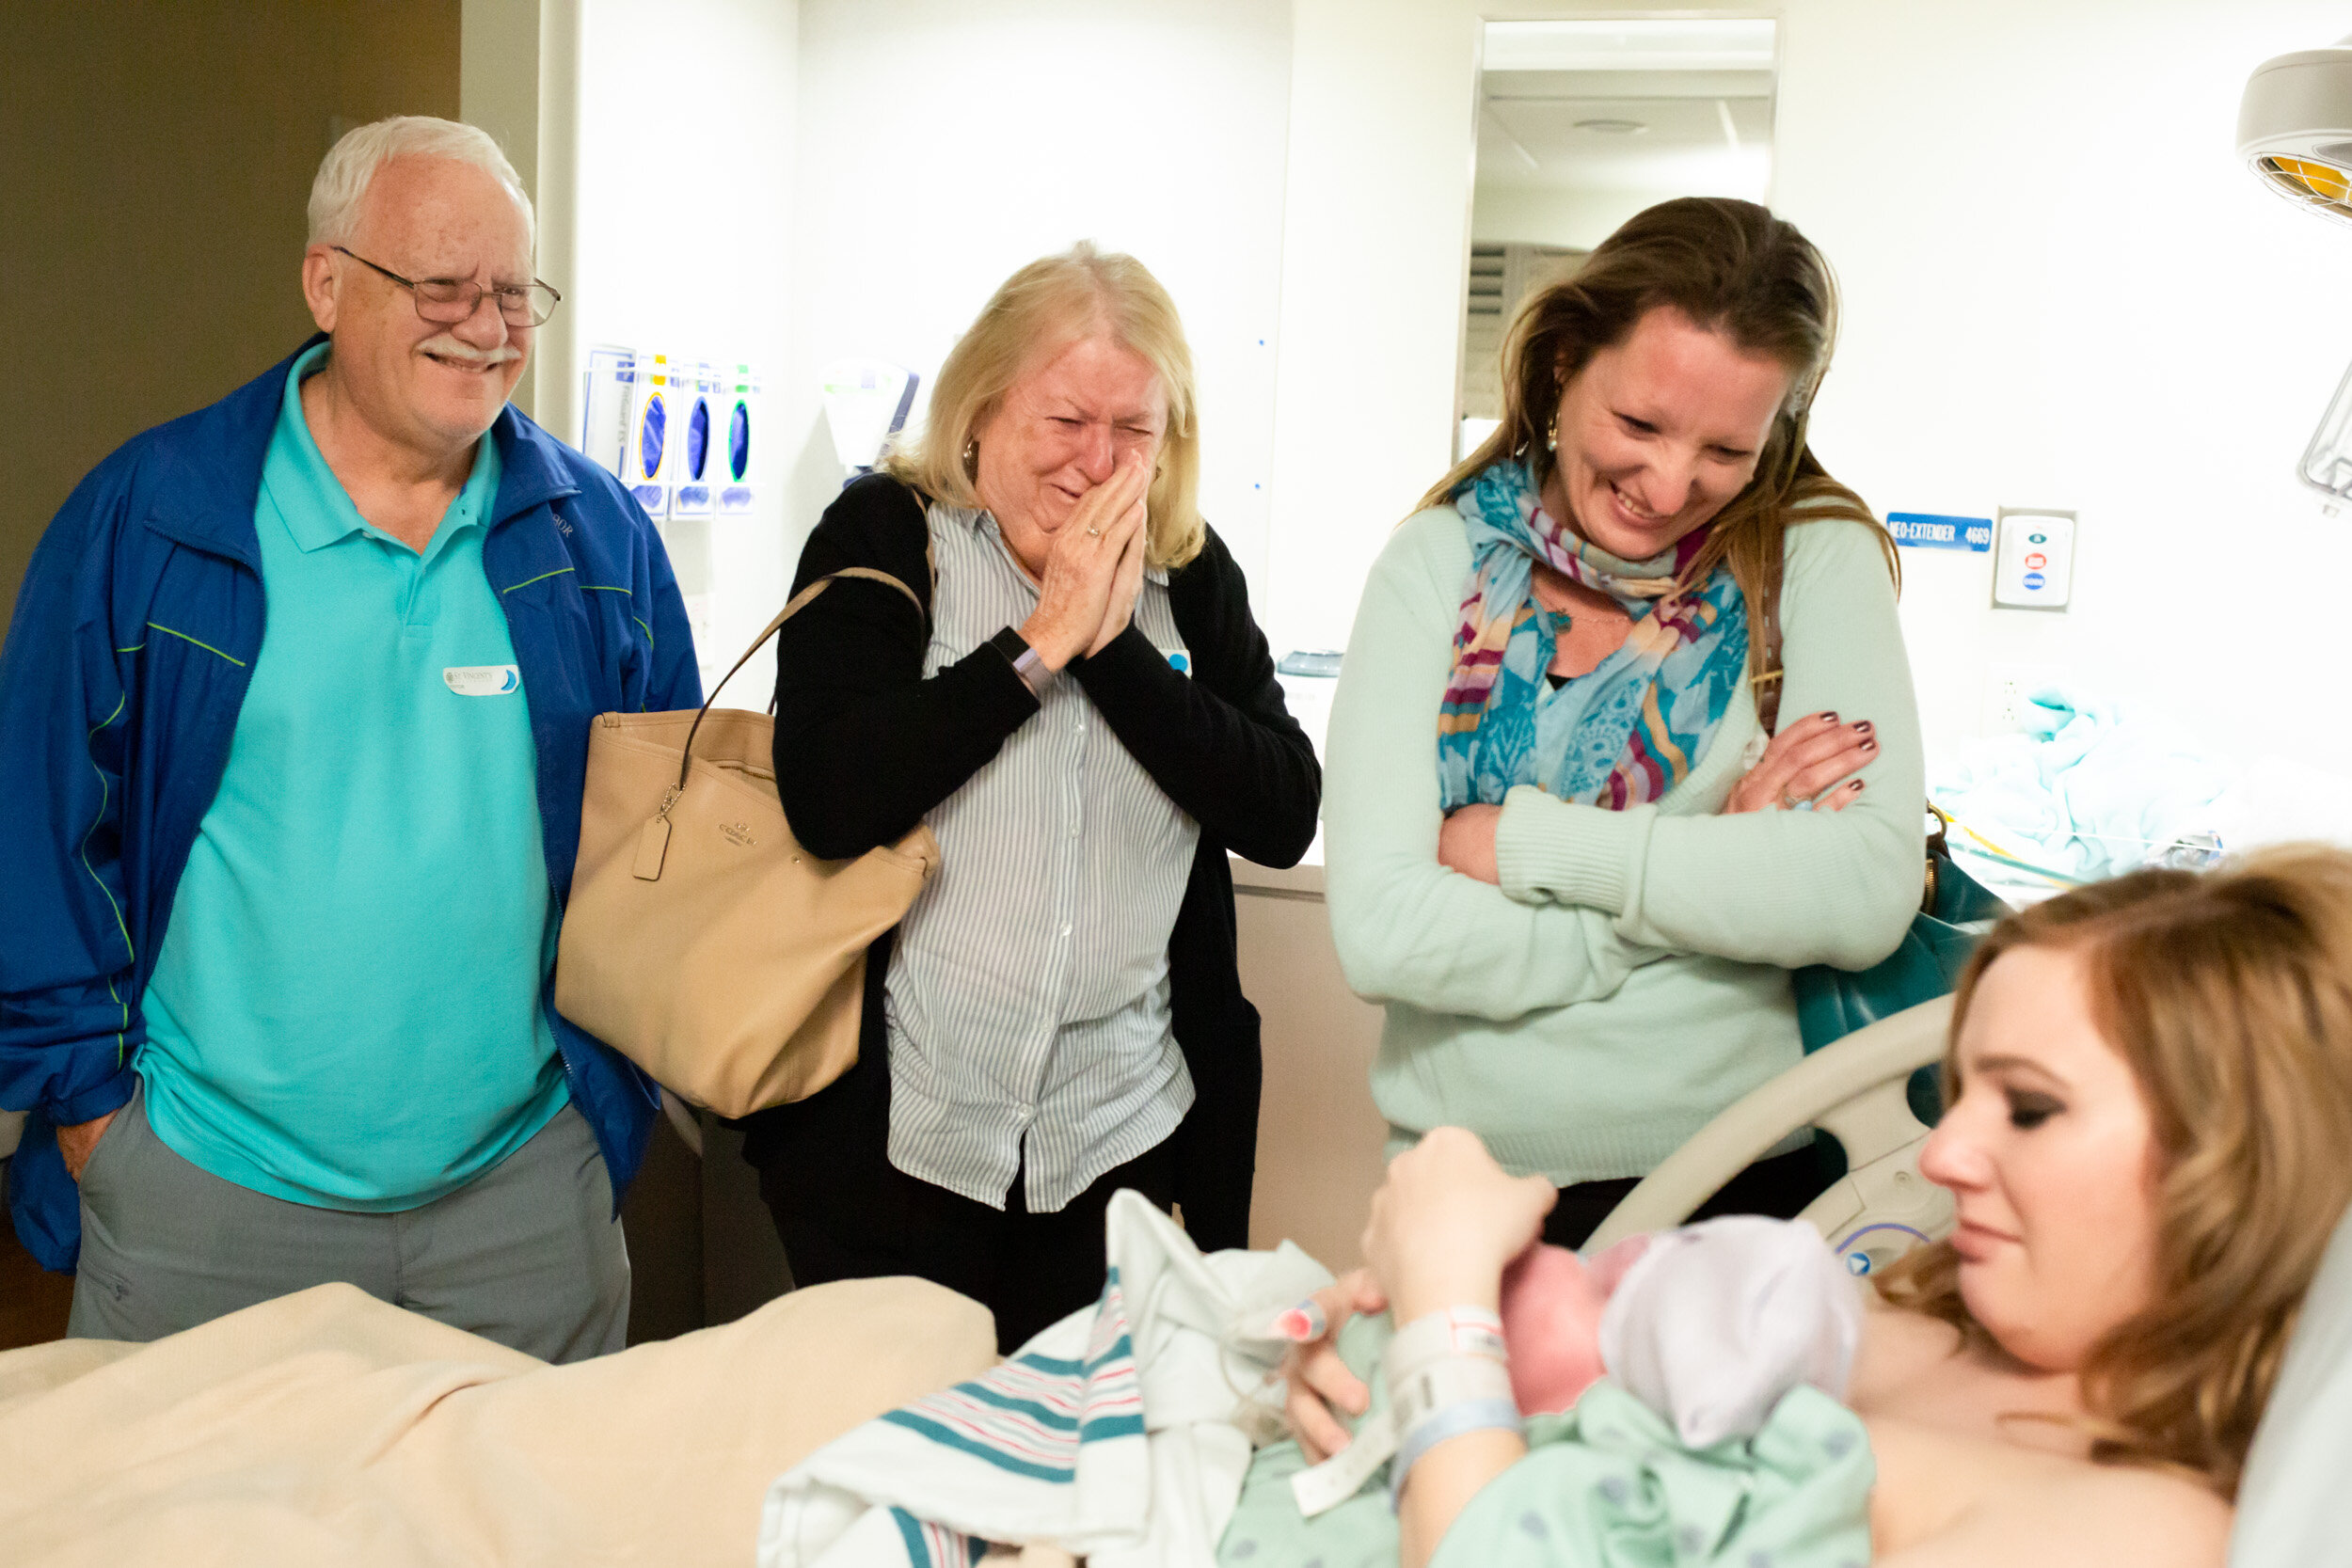 family admiring the newborn addition to their family